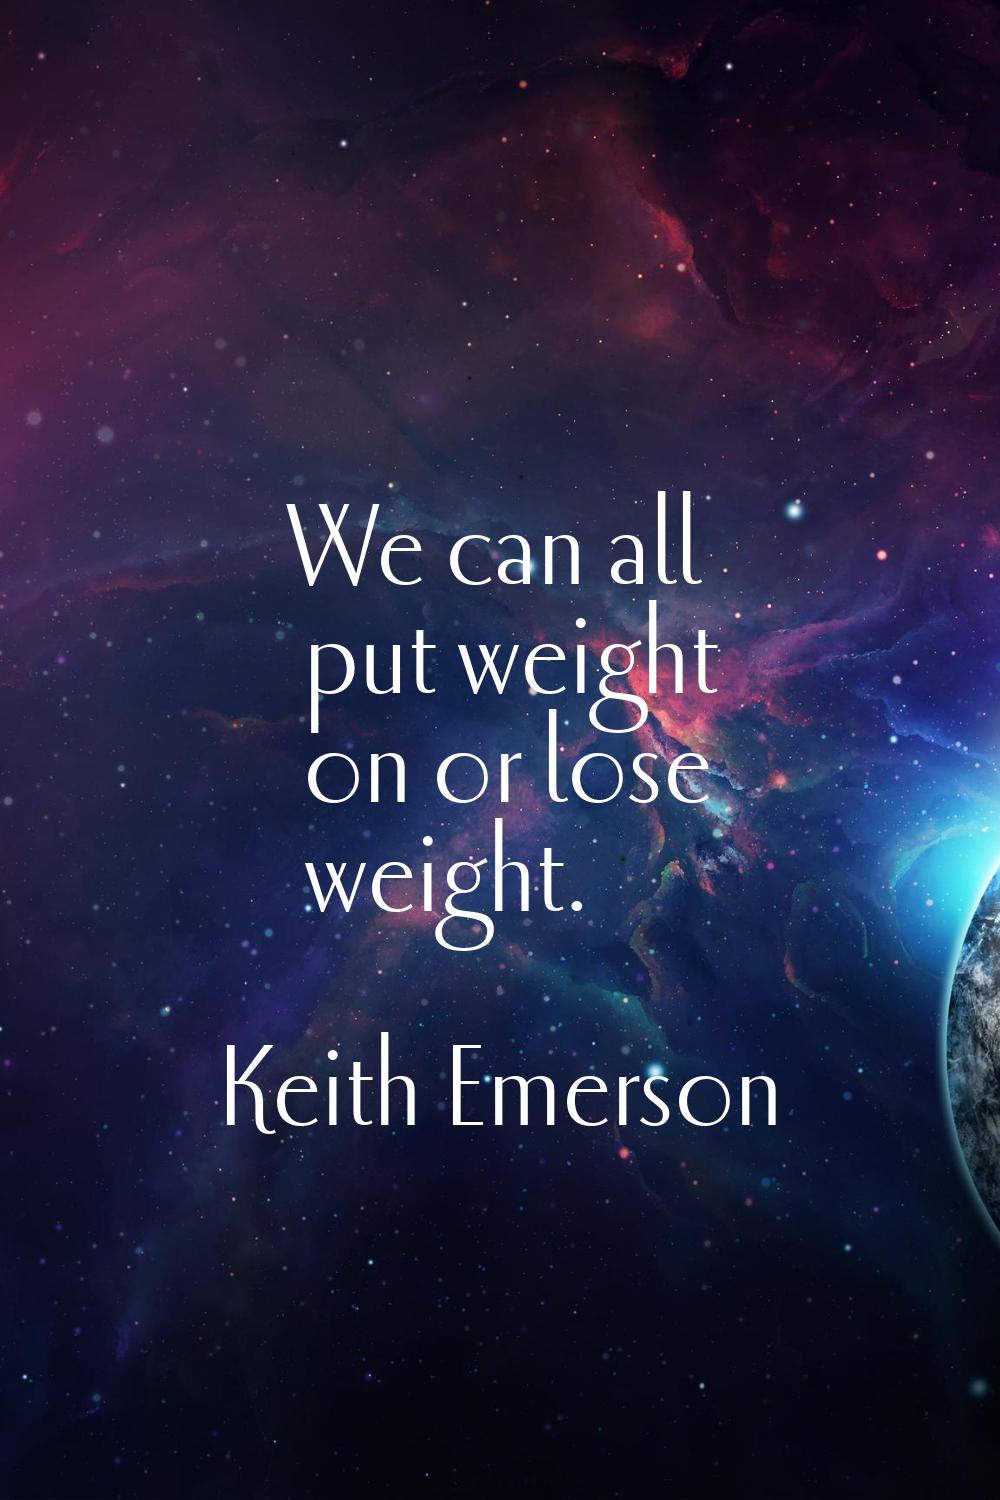 We can all put weight on or lose weight.